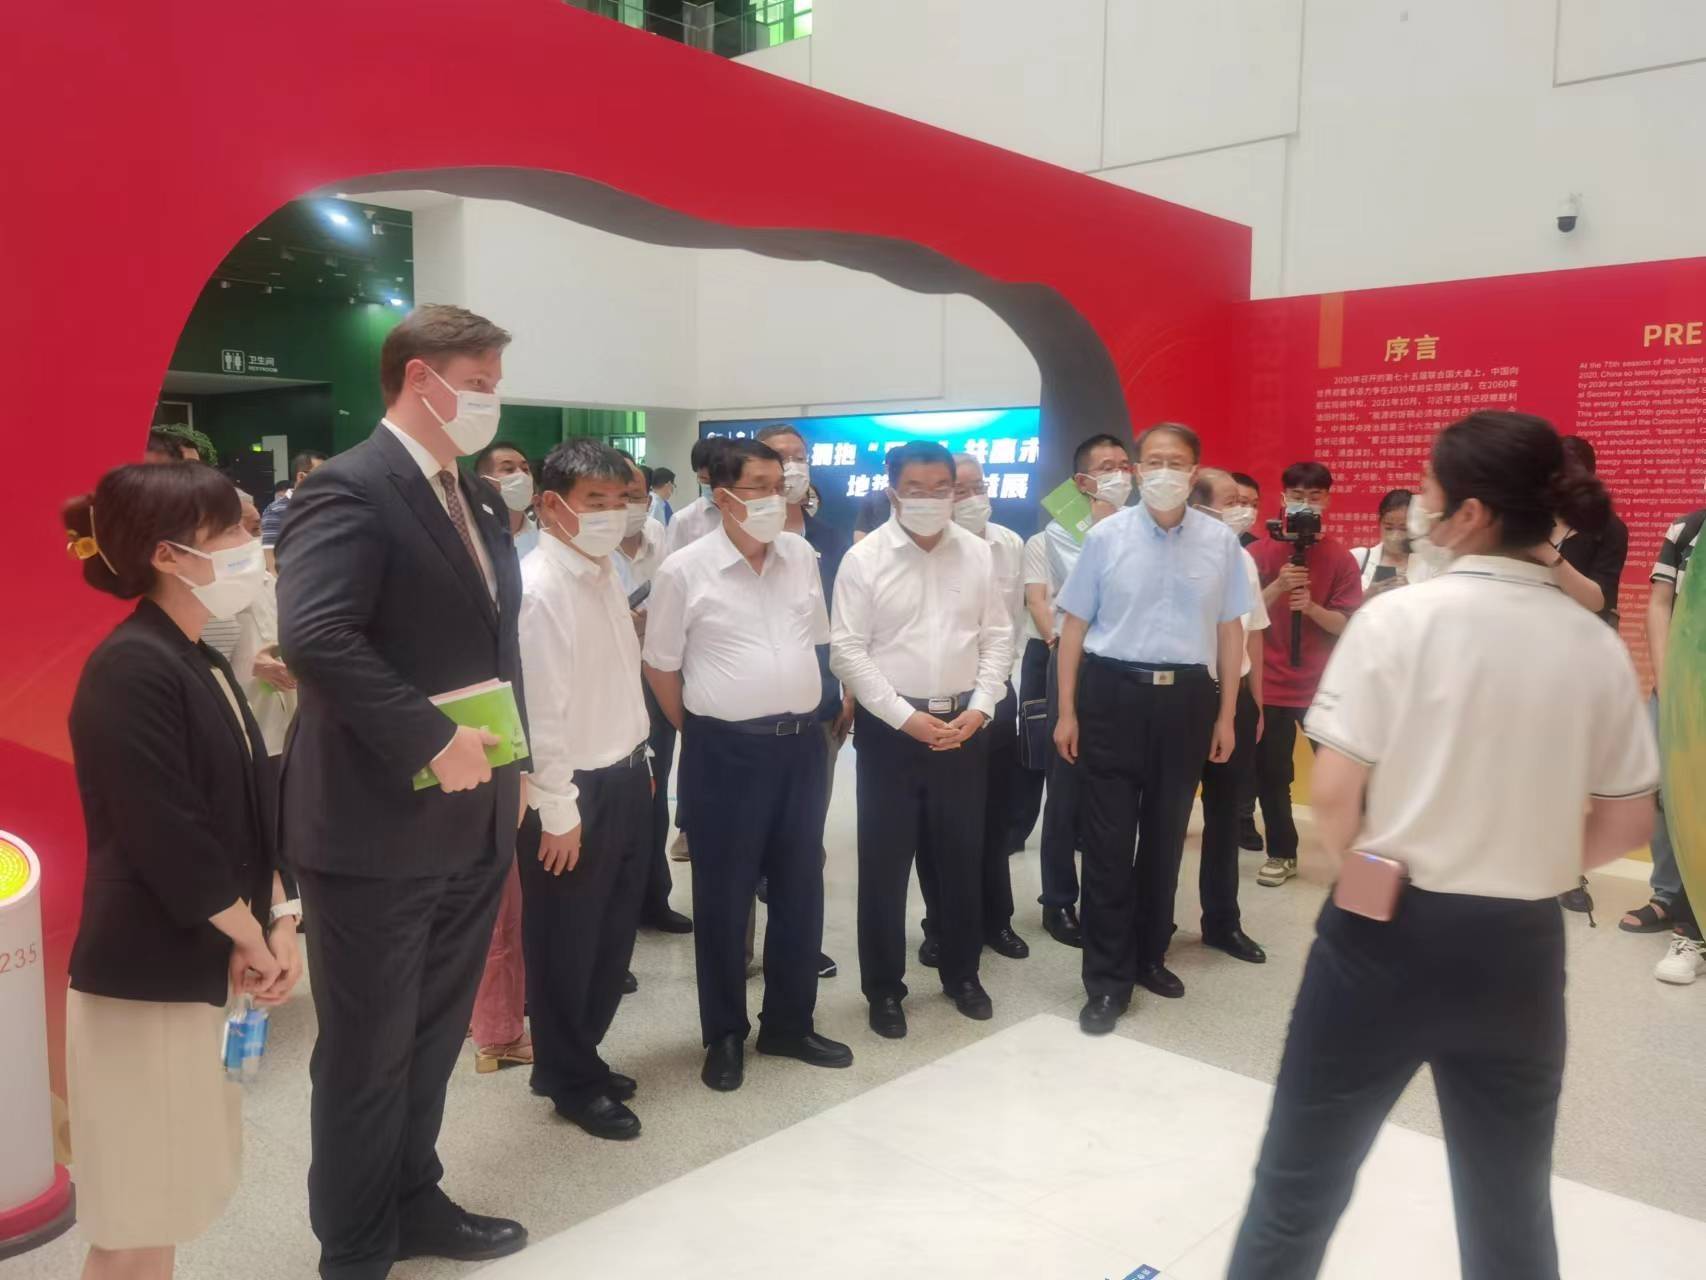 Sinopec´s Geothermal Exhibition at the China Science and Technology Museum - mynd